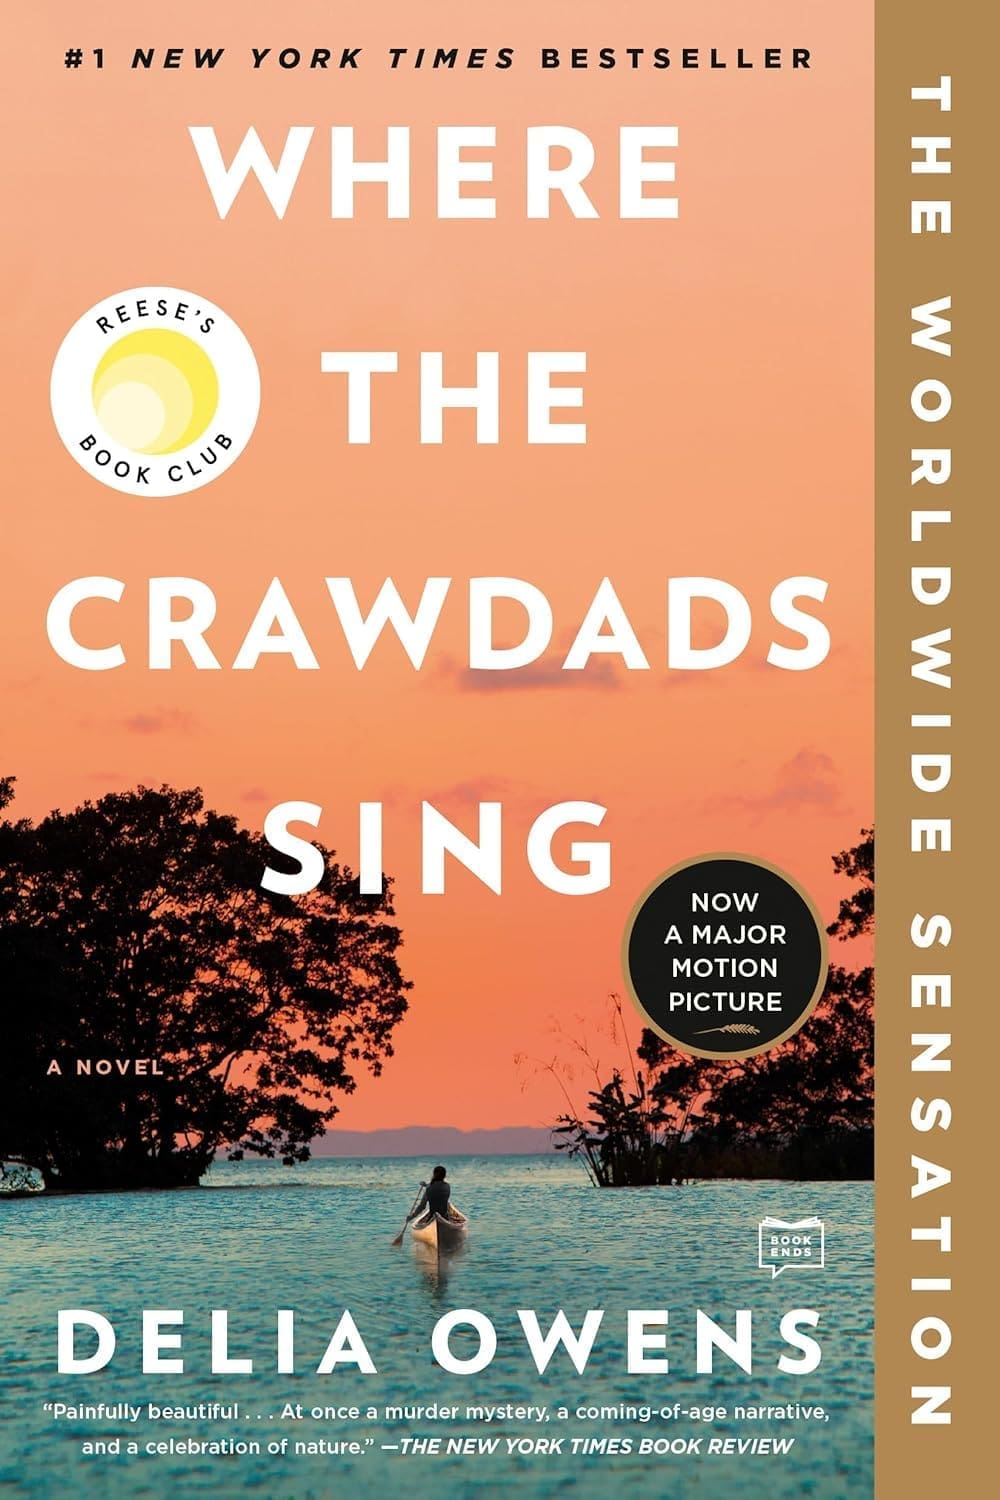 Book cover for where the crawdads sing by delia owens a girl in a canoe at sunset